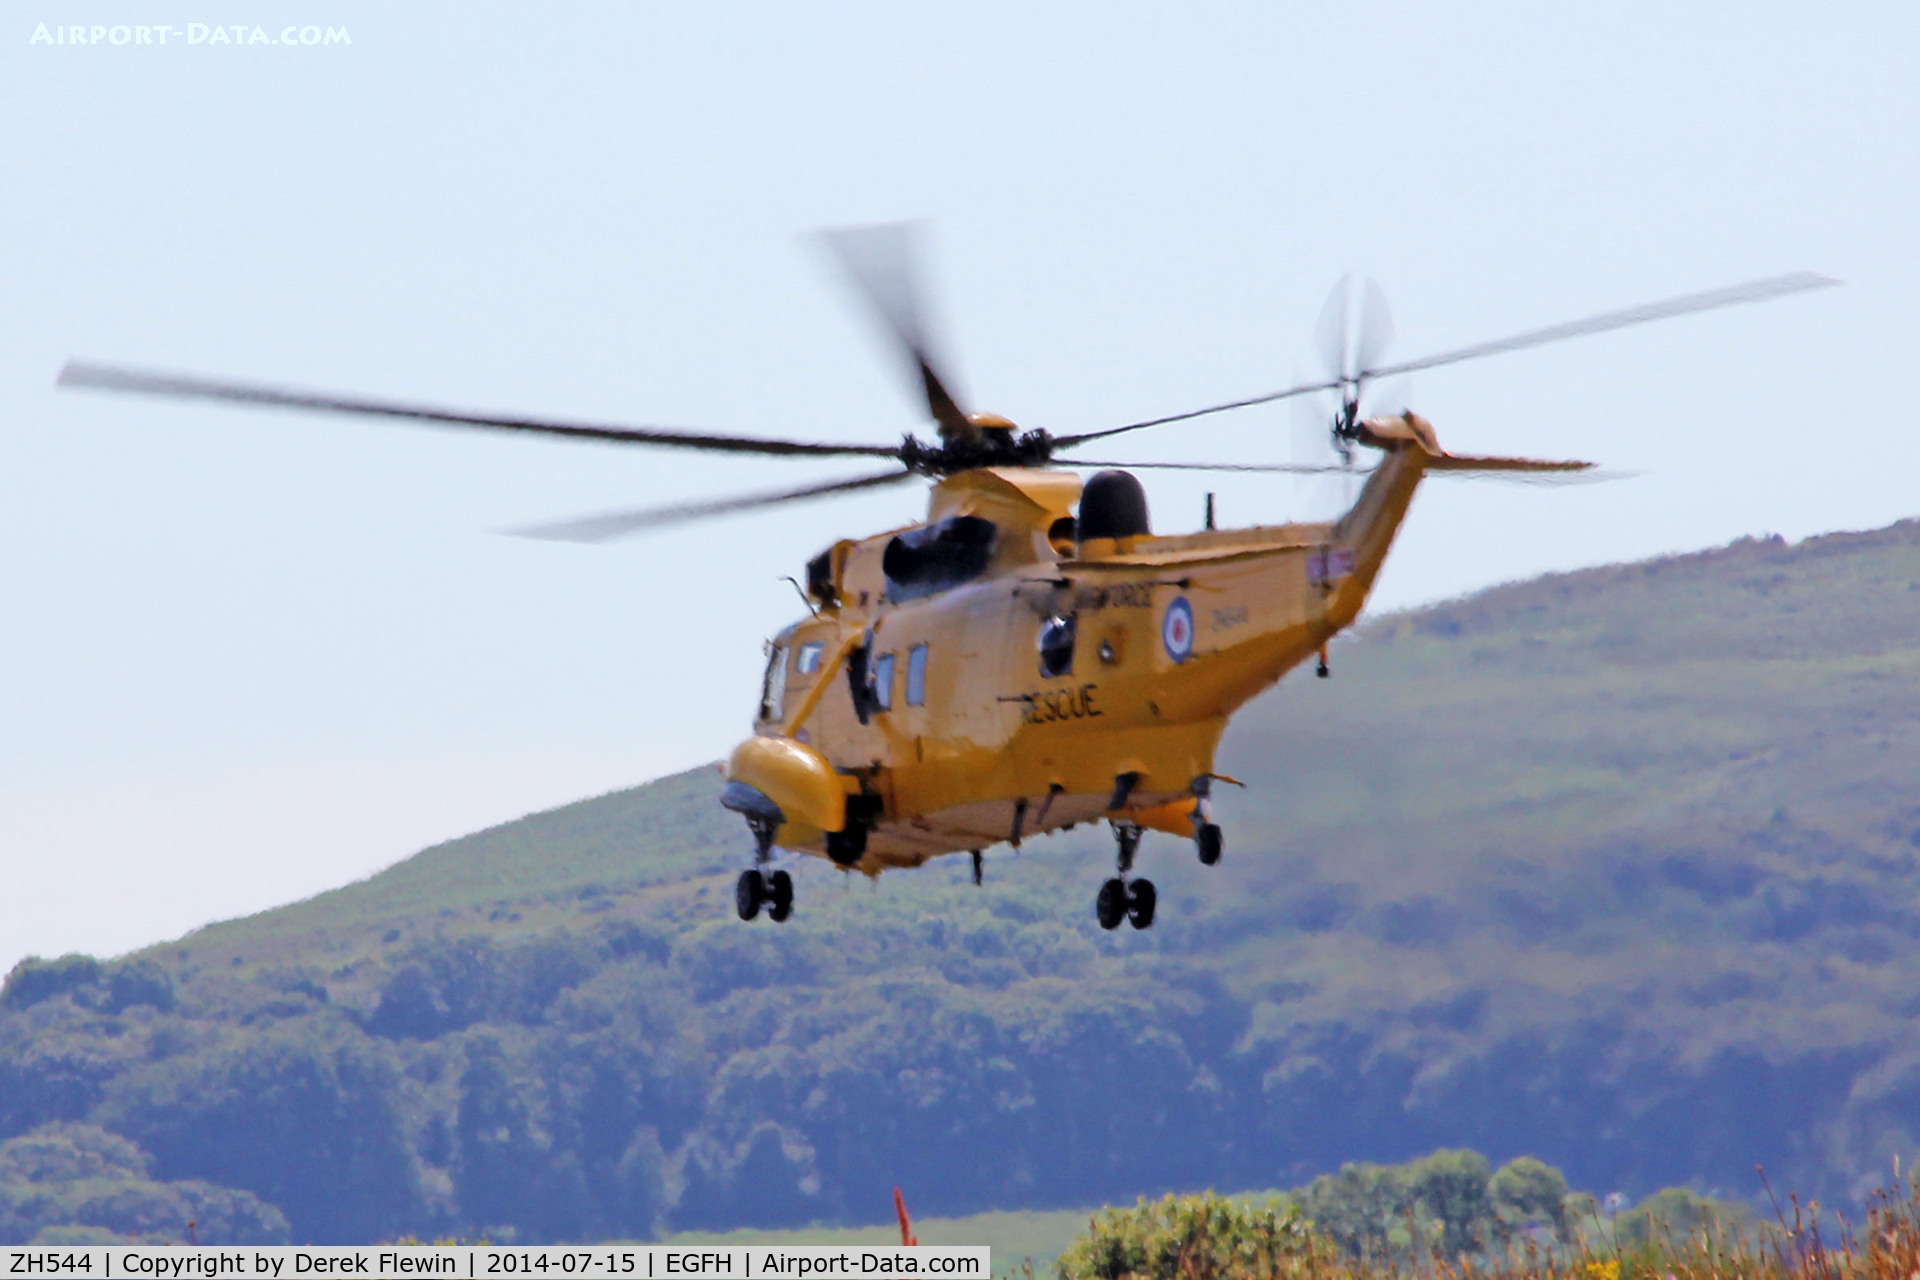 ZH544, Westland Sea King HAR.3A C/N WA1010, Sea King HAR.3A, call sign Rescue 169, seen departing runway 04 at EGFH, en-route to Port Eynon to pick up a casualty, then to A&E Morriston Hospital.